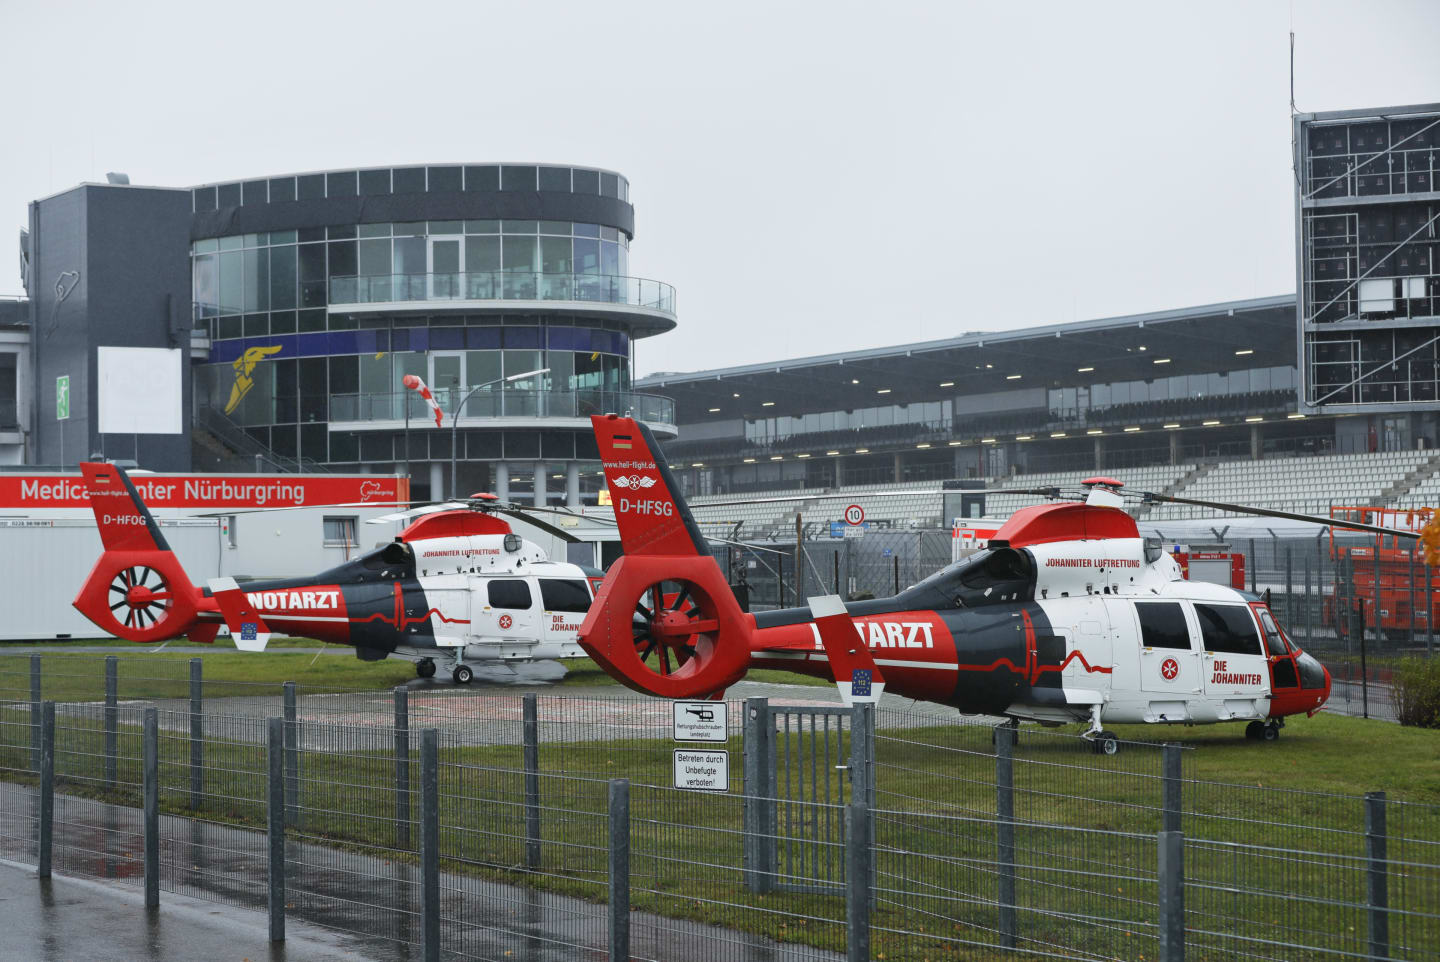 NUERBURG, GERMANY - OCTOBER 09: The medical helicopter is pictured outside the medical centre in